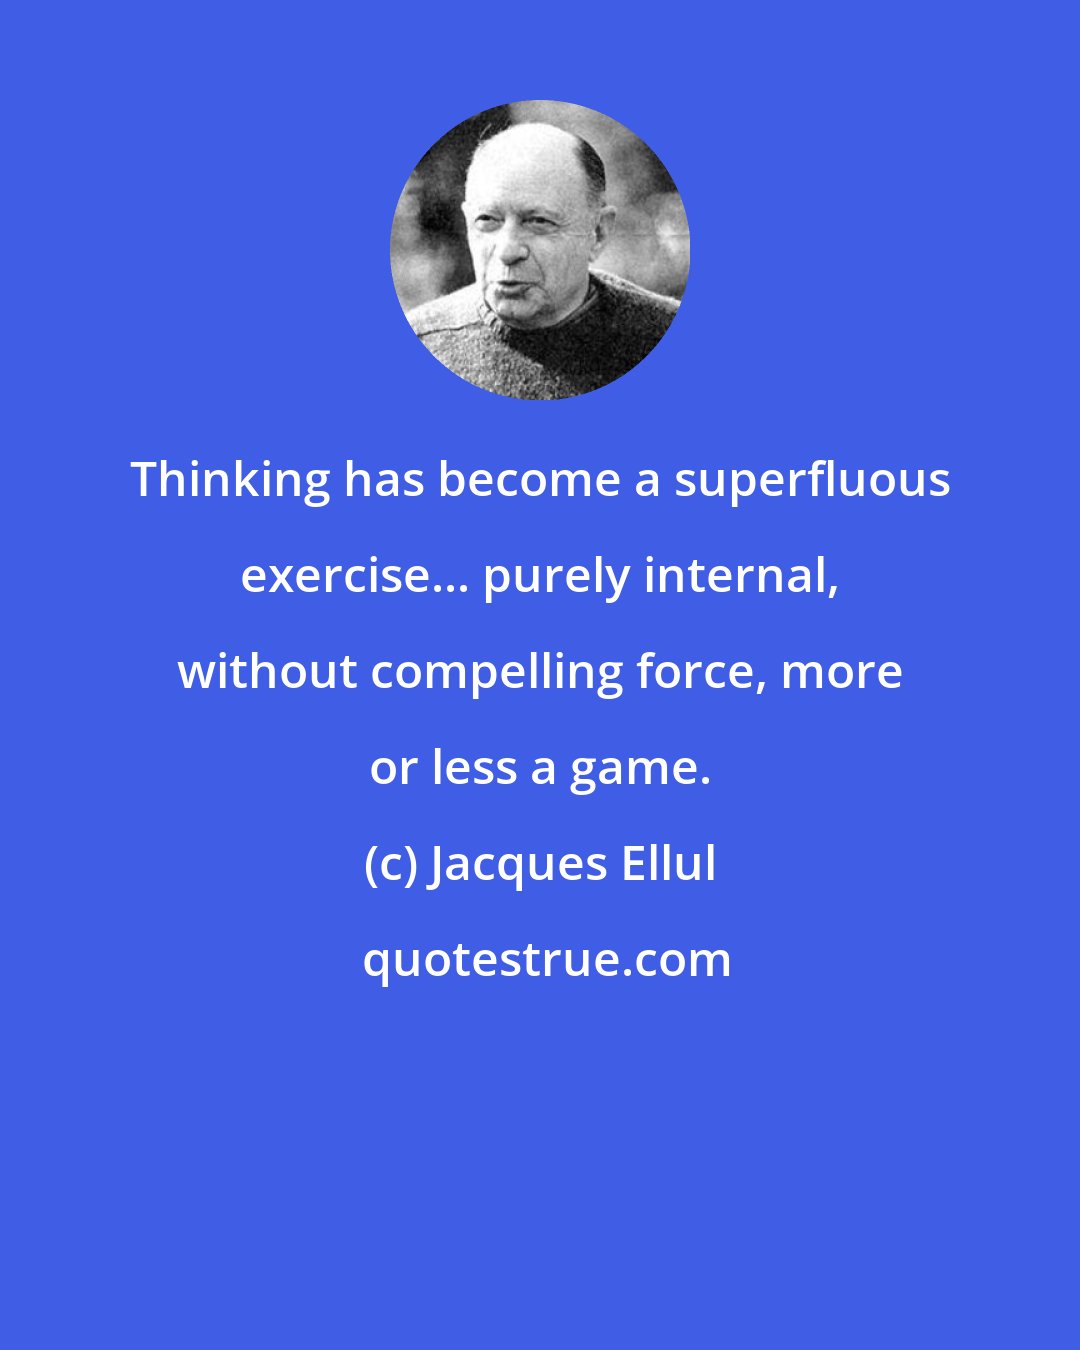 Jacques Ellul: Thinking has become a superfluous exercise... purely internal, without compelling force, more or less a game.